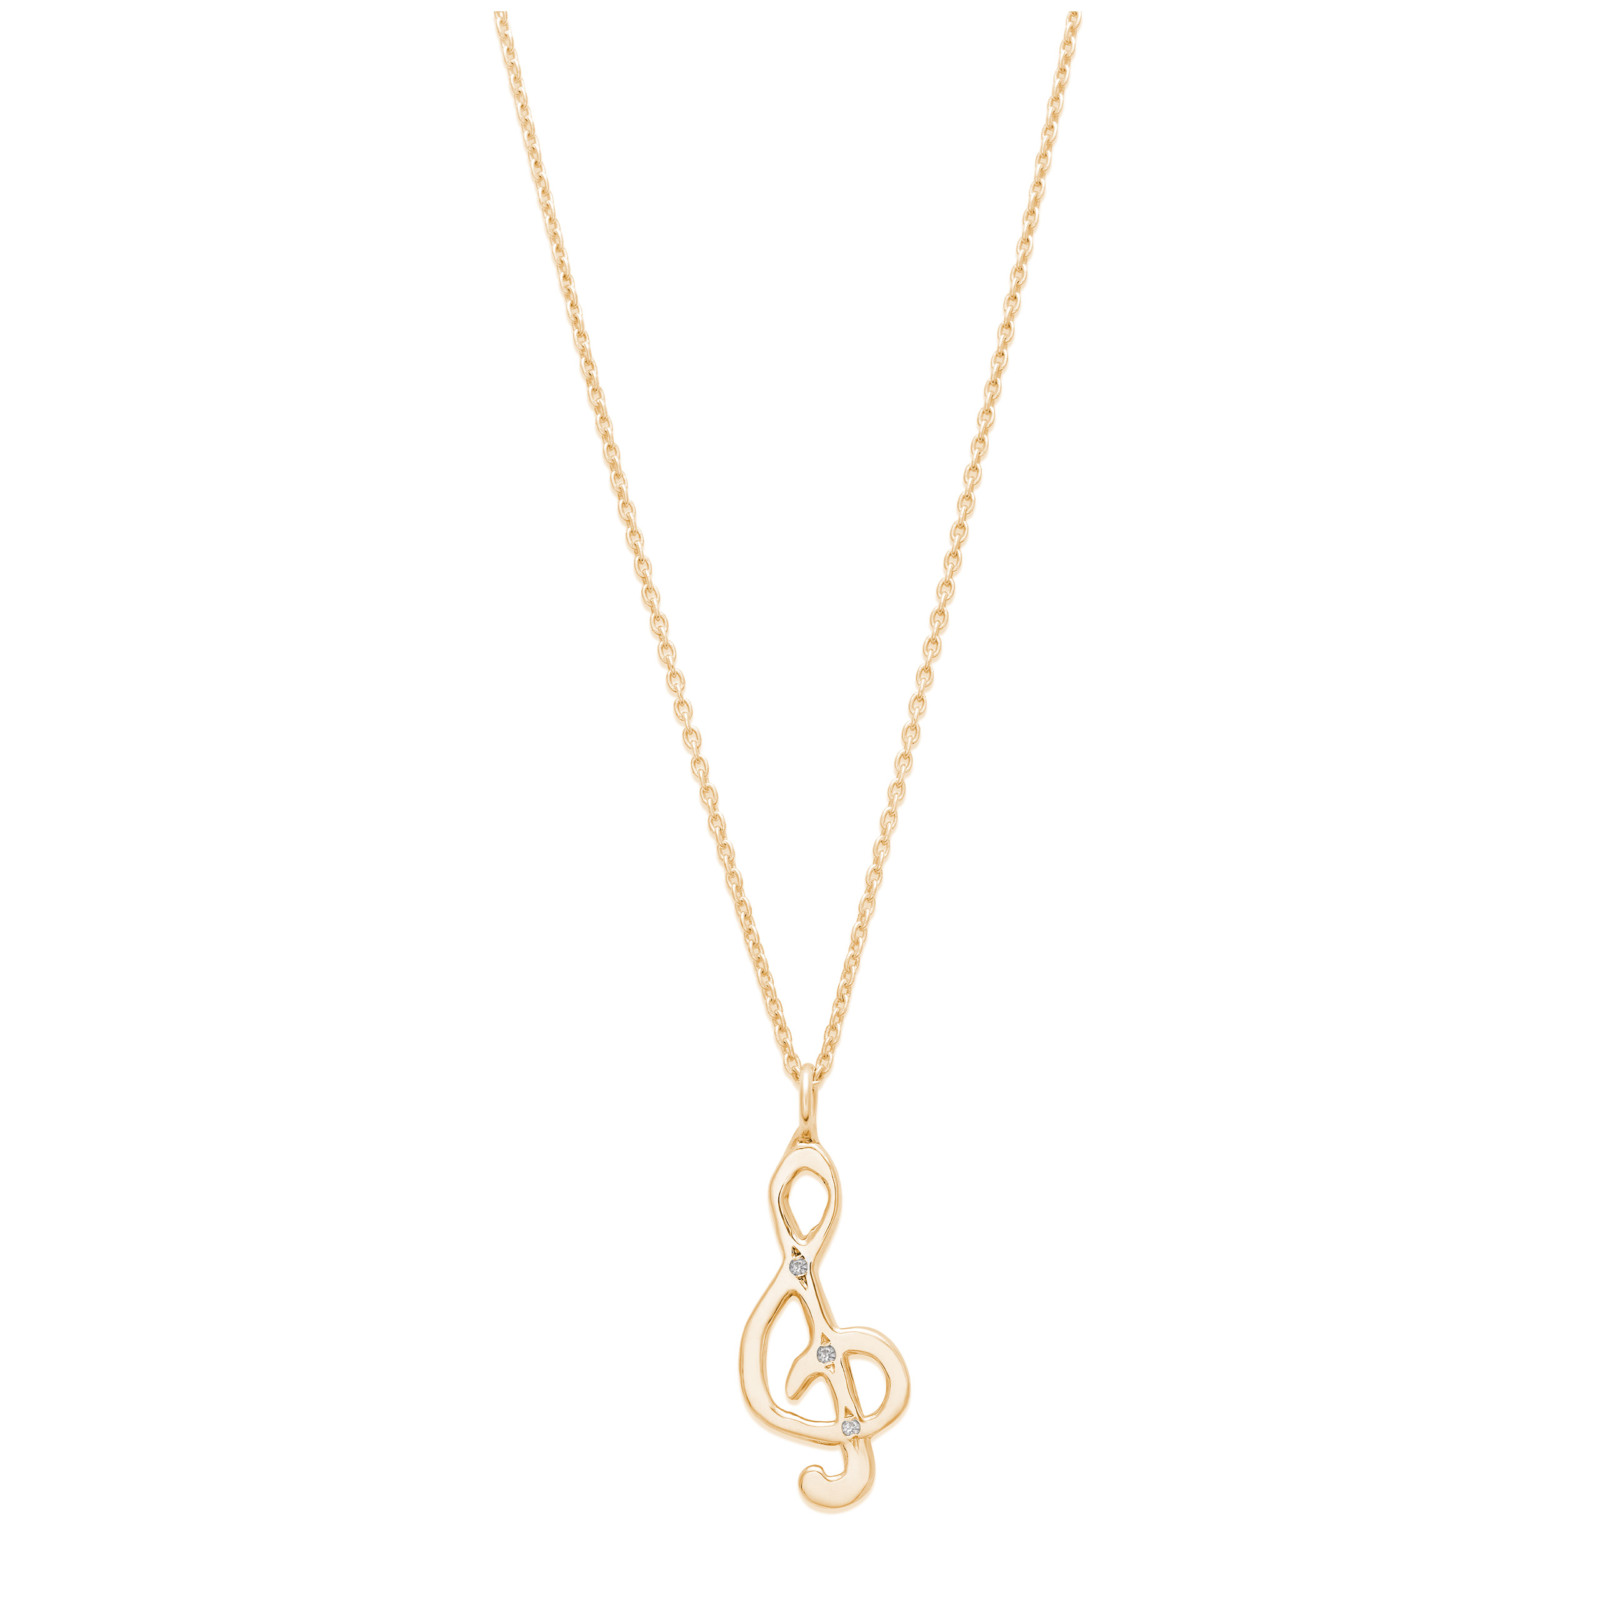 Treble clef music note charm necklace in 14k yellow gold with white diamonds